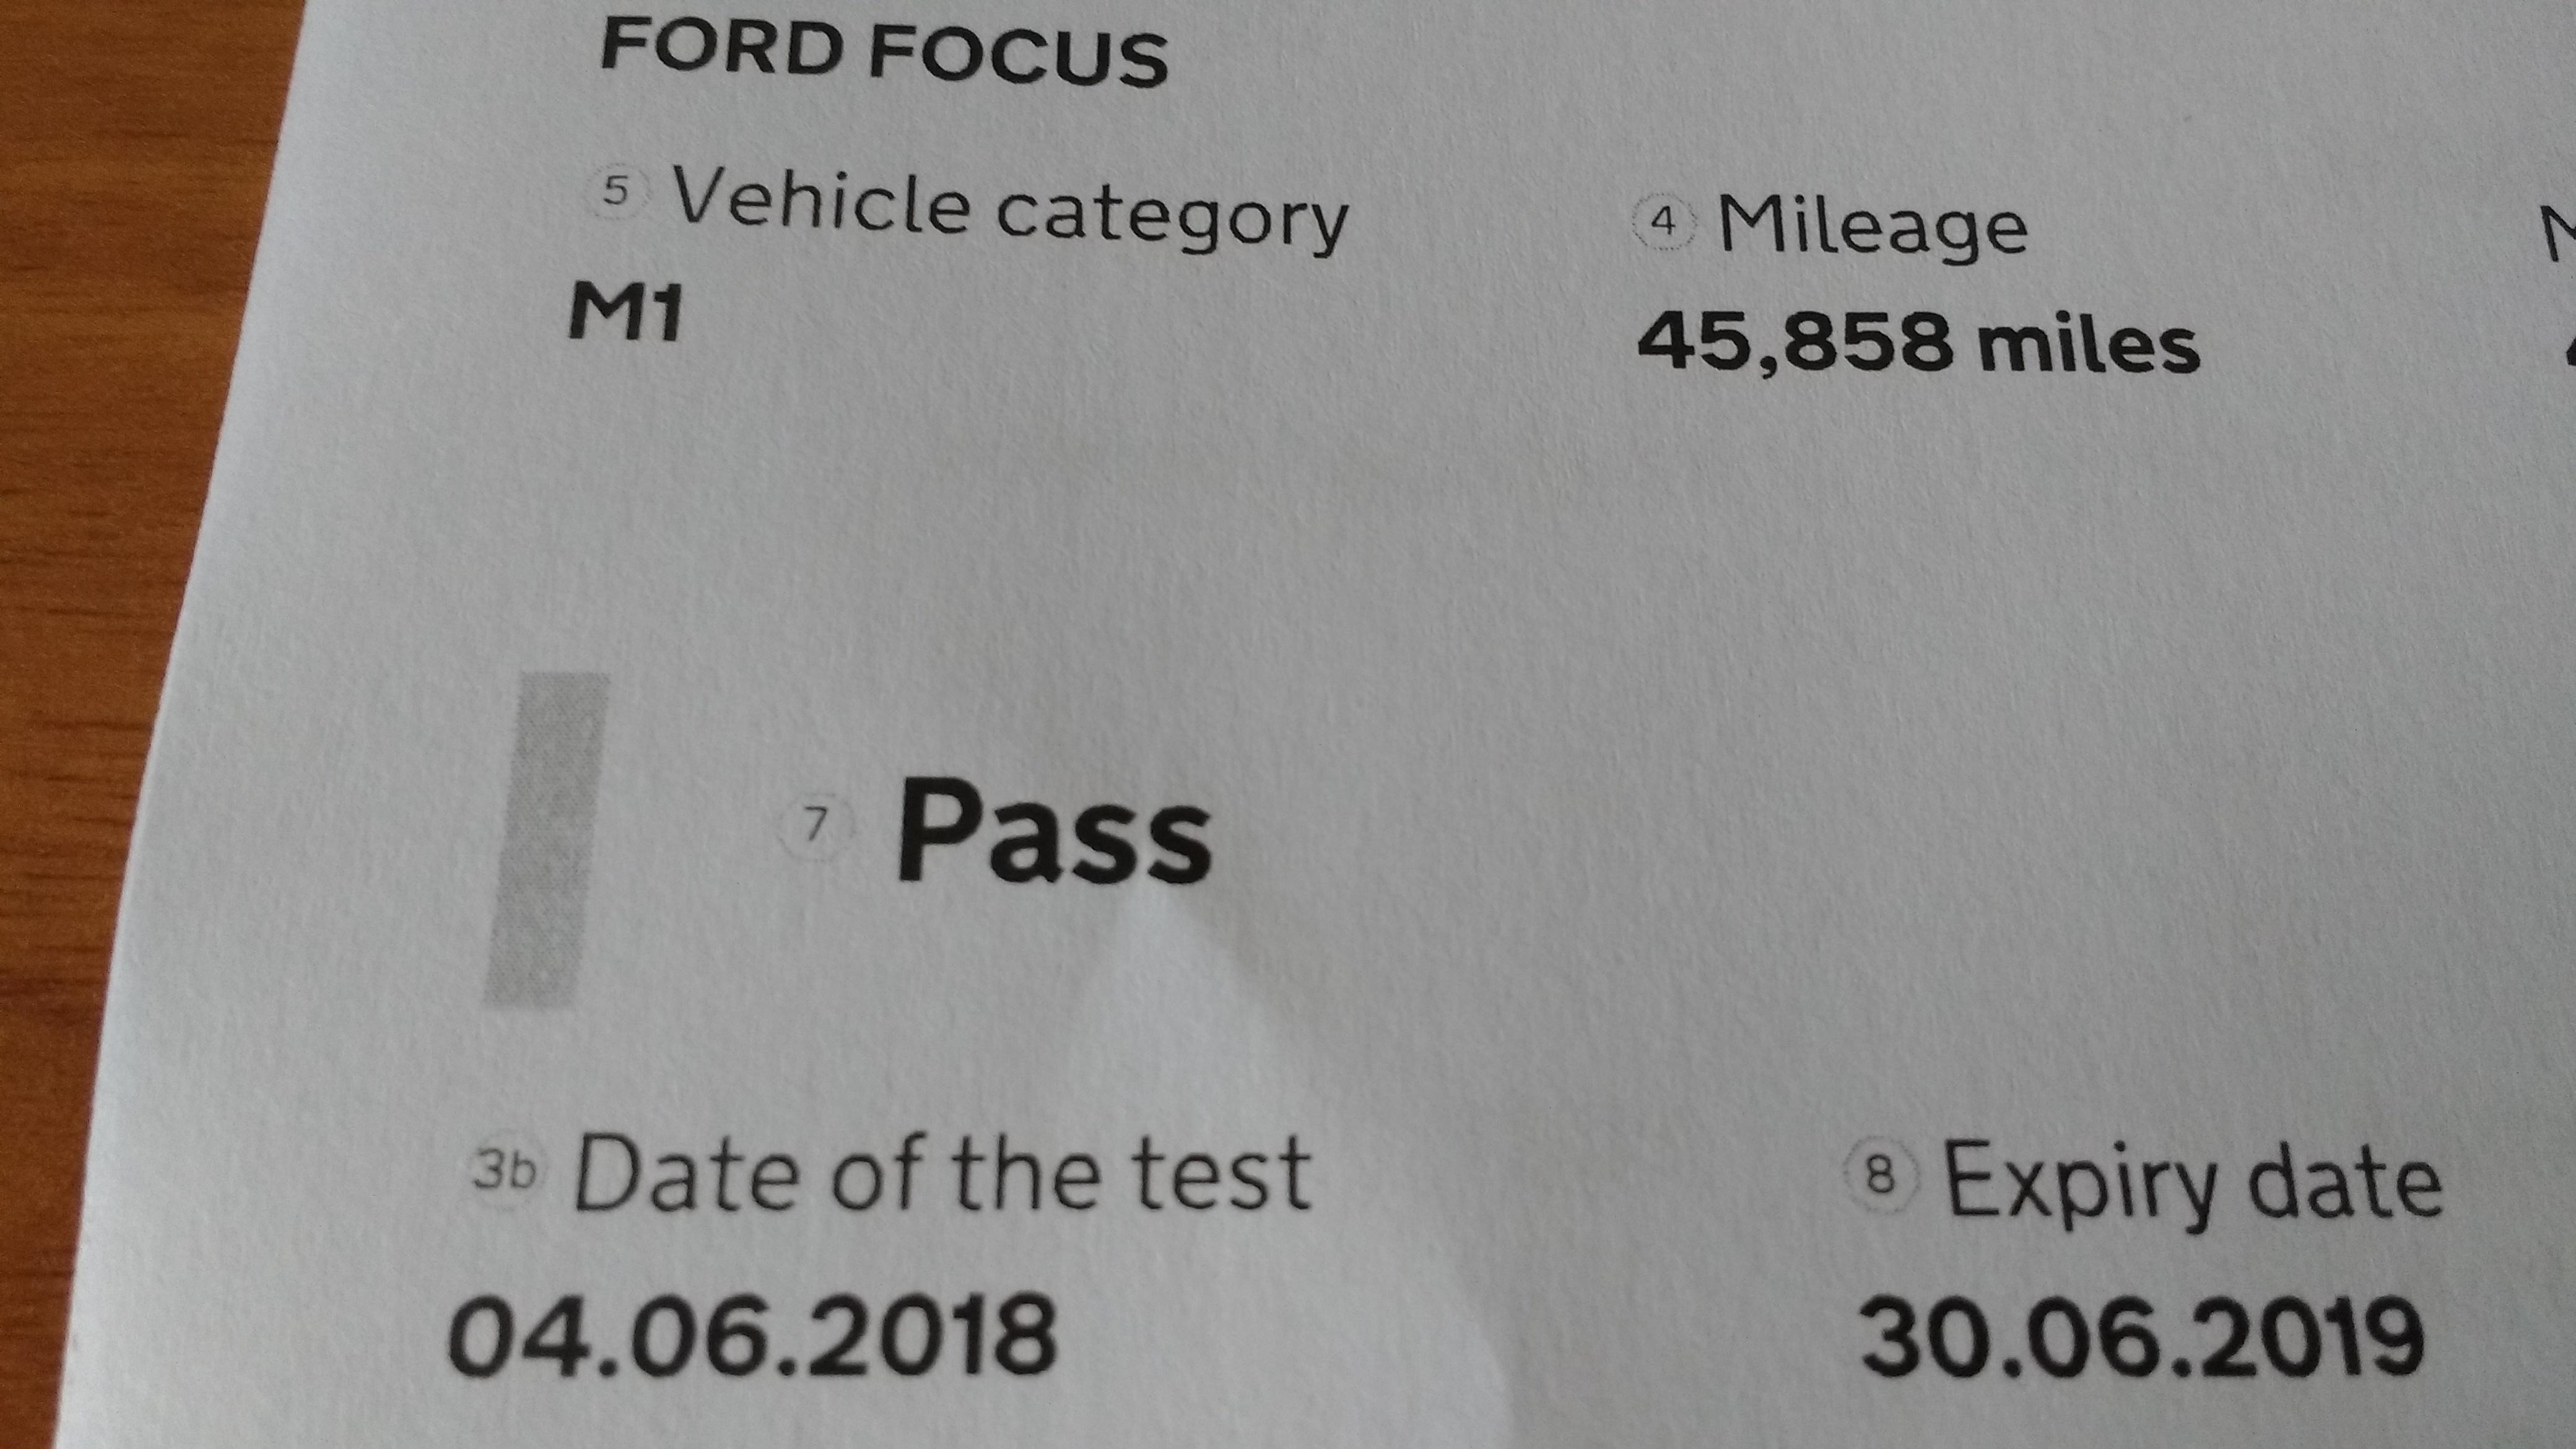 Mk3 1.6 Tdci Injector Fault - Ford Focus Club - Ford Owners Club - Ford Forums